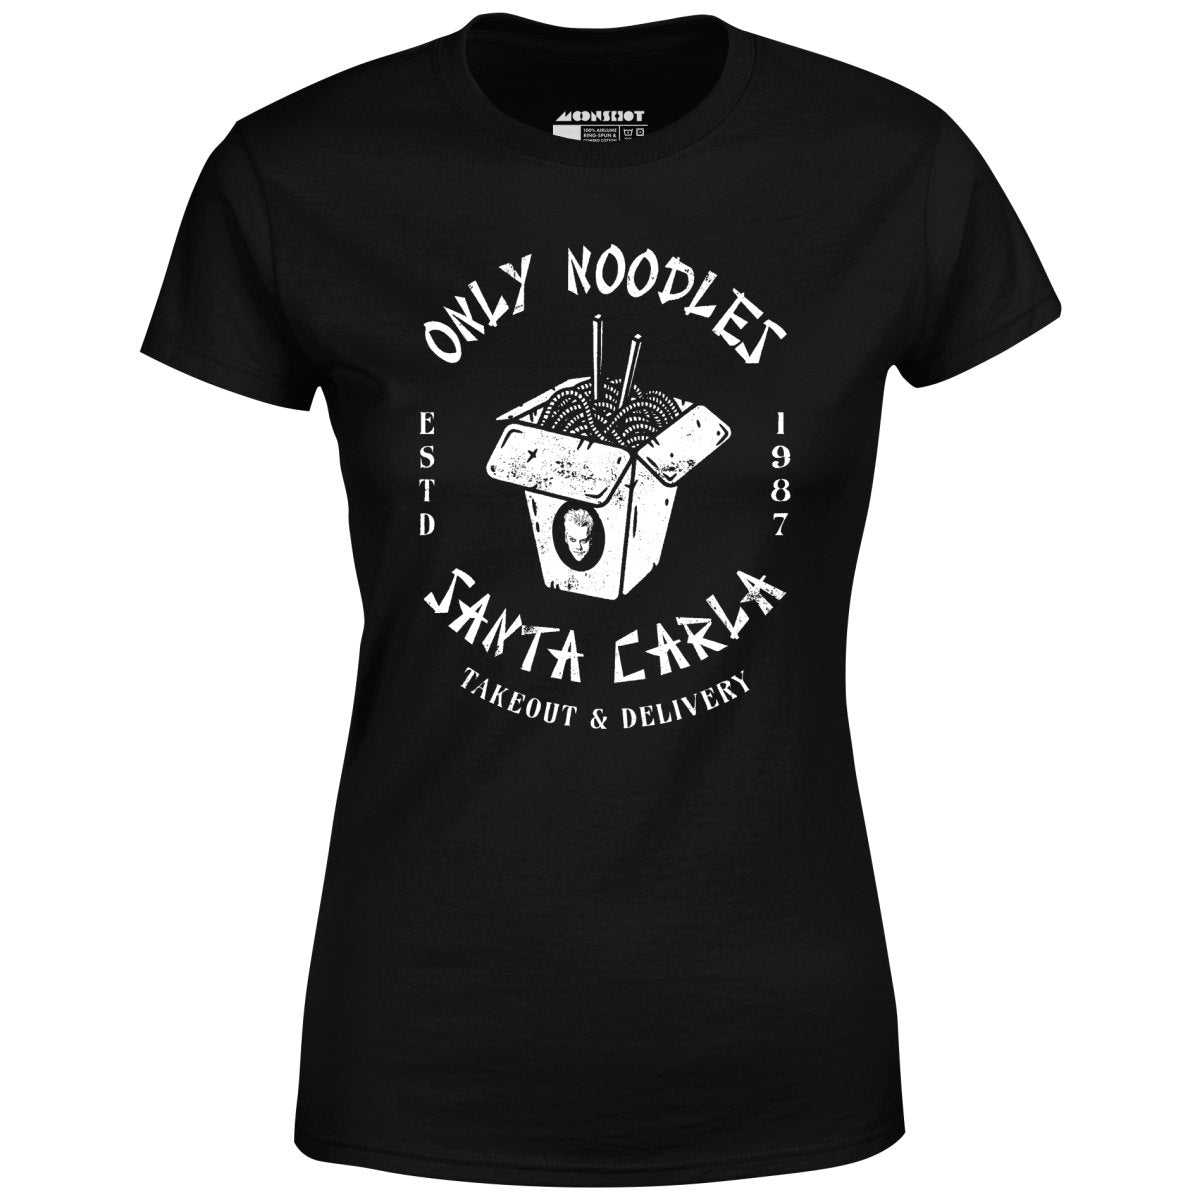 Only Noodles Takeout & Delivery - Santa Carla - Women's T-Shirt